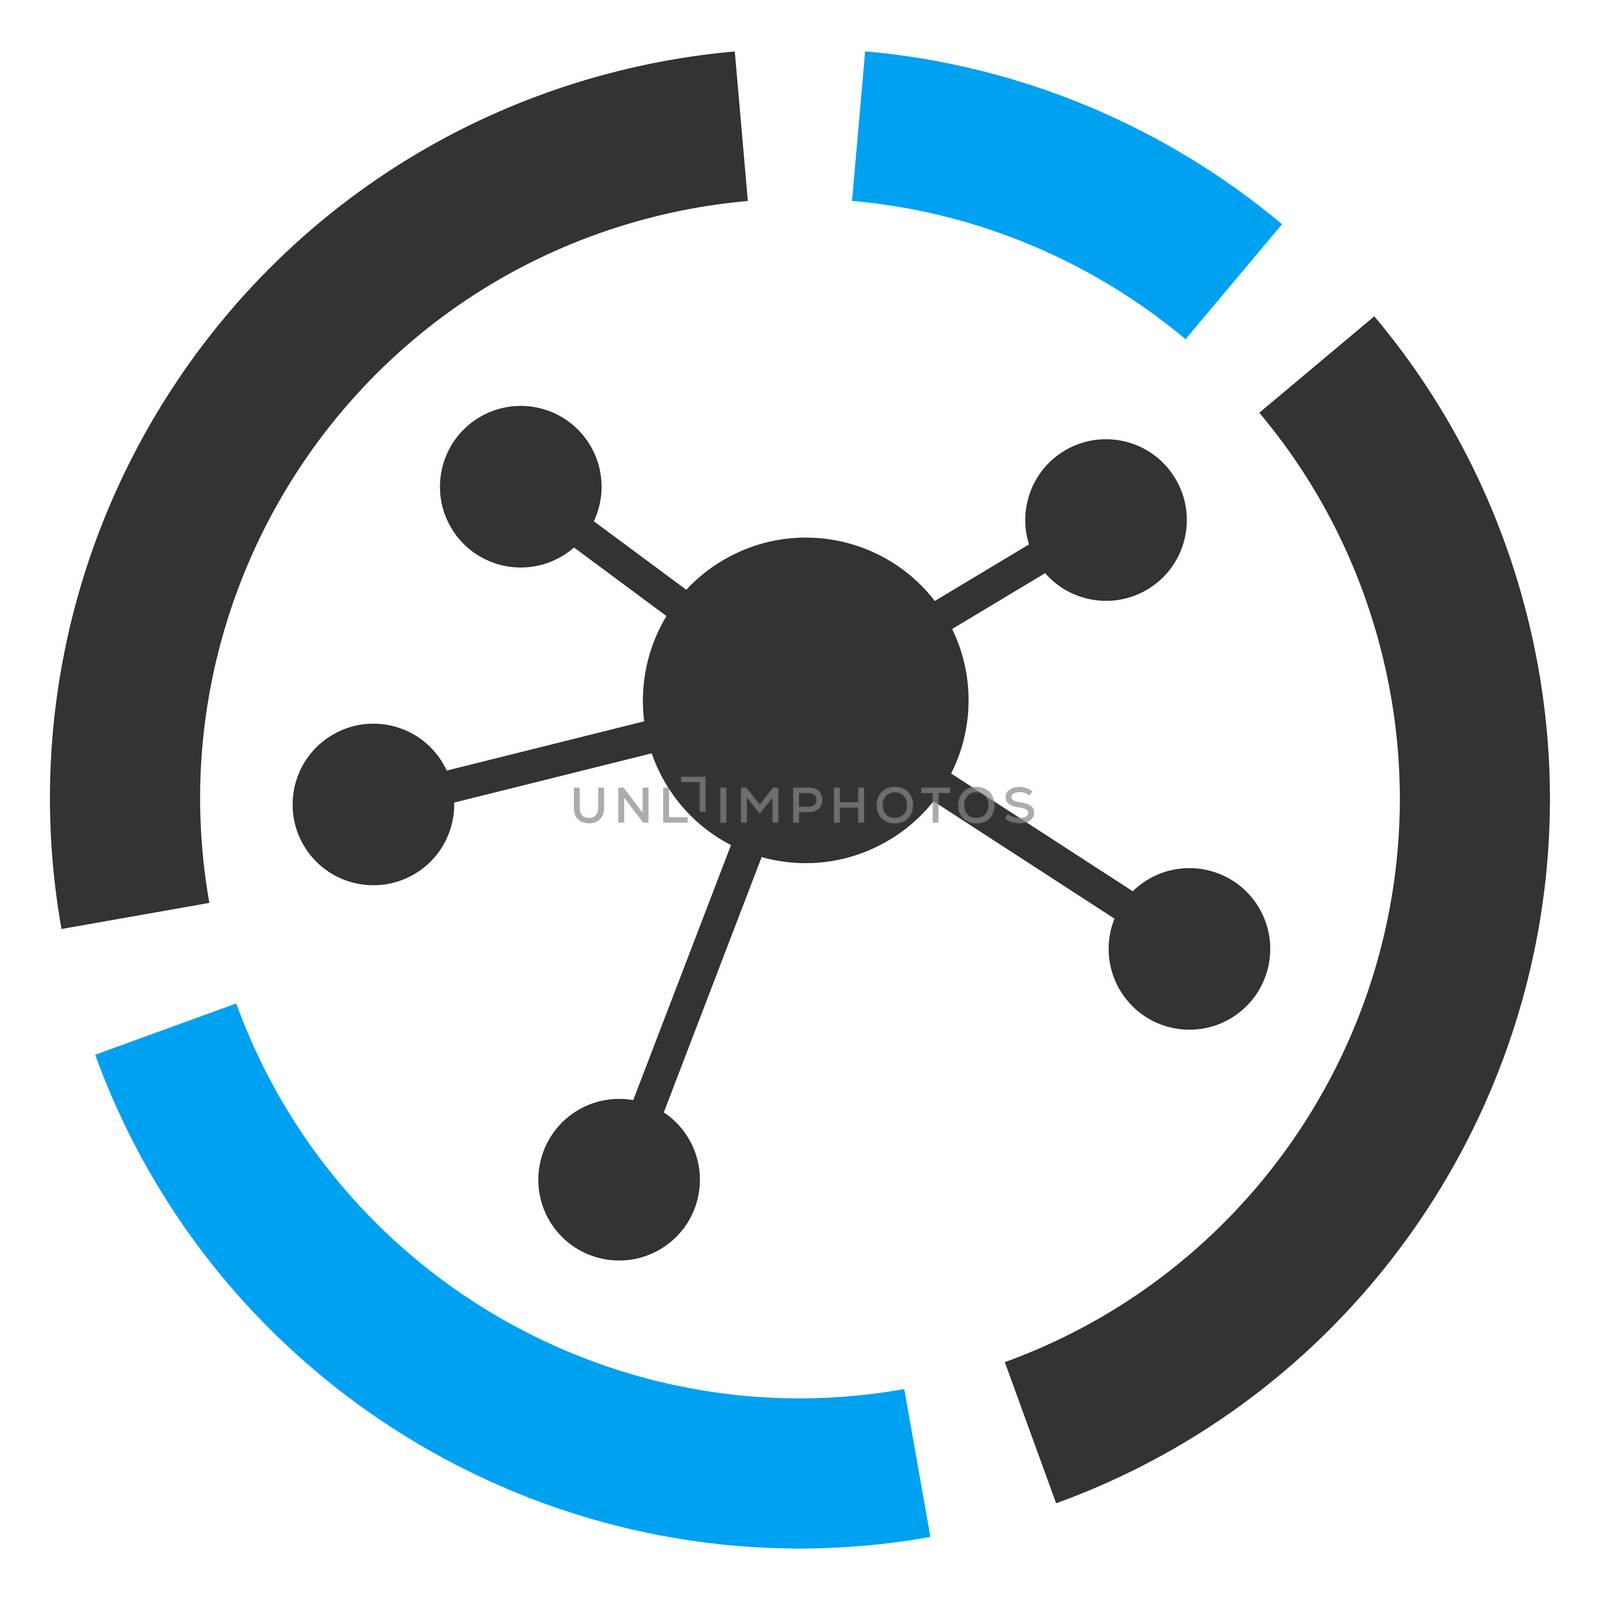 Connections diagram icon from Business Bicolor Set. Glyph style is bicolor flat symbol, blue and gray colors, rounded angles, white background.